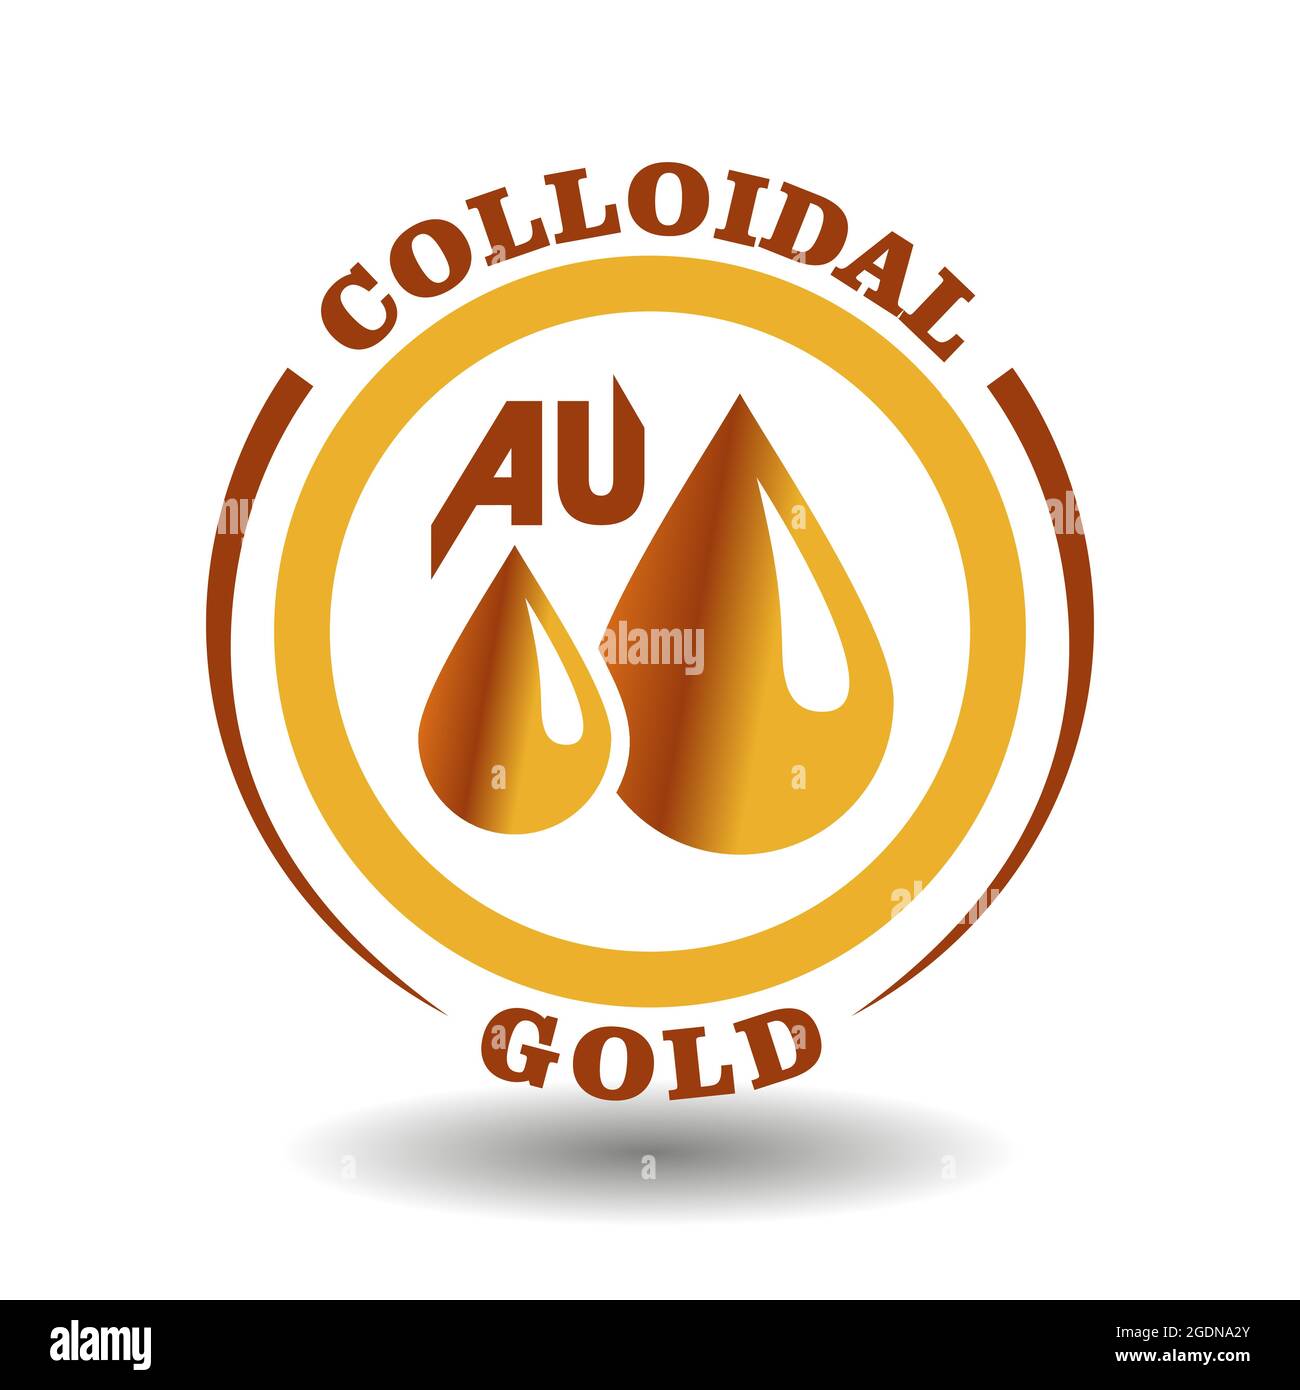 Creative round vector icon of Colloidal Gold ingredient with yellow drops circle sign for labeling luxury cosmetics contain Golden liquid solution, be Stock Vector